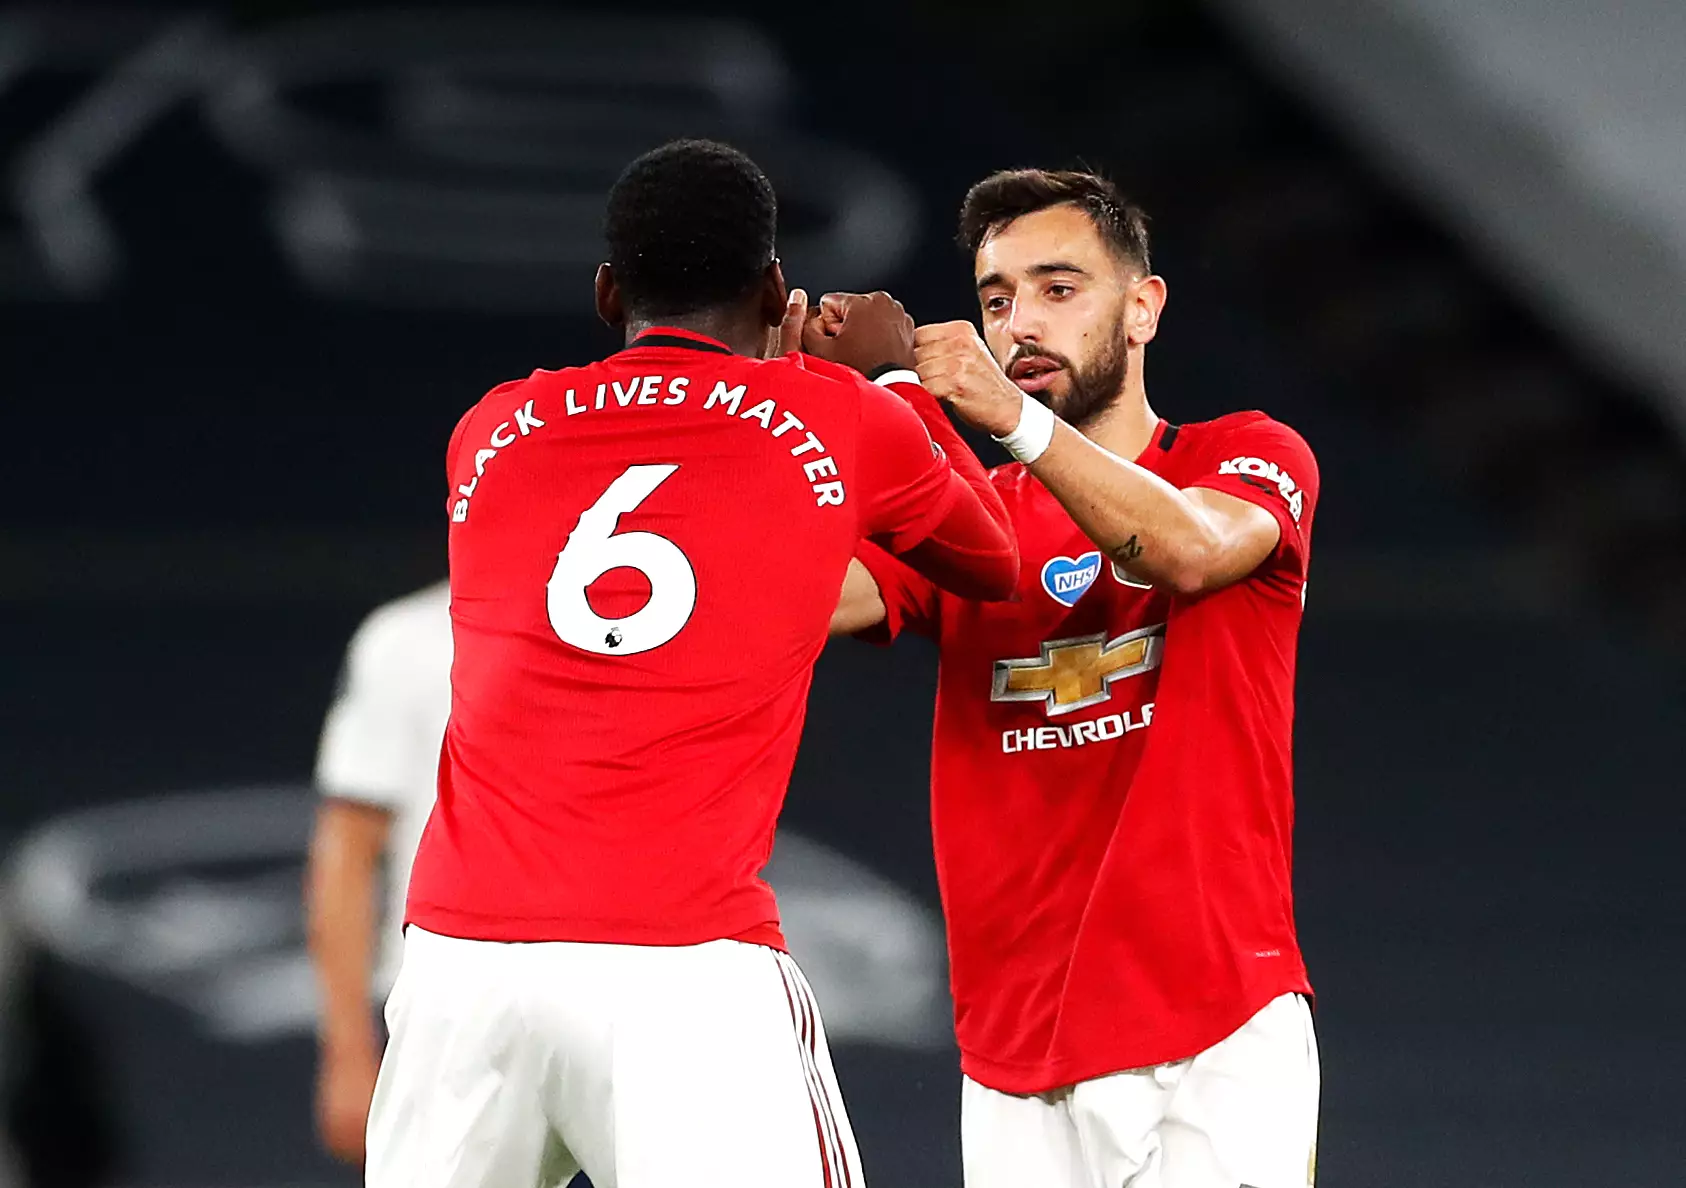 Pogba and Fernandes have a good partnership in midfield. Image: PA Images